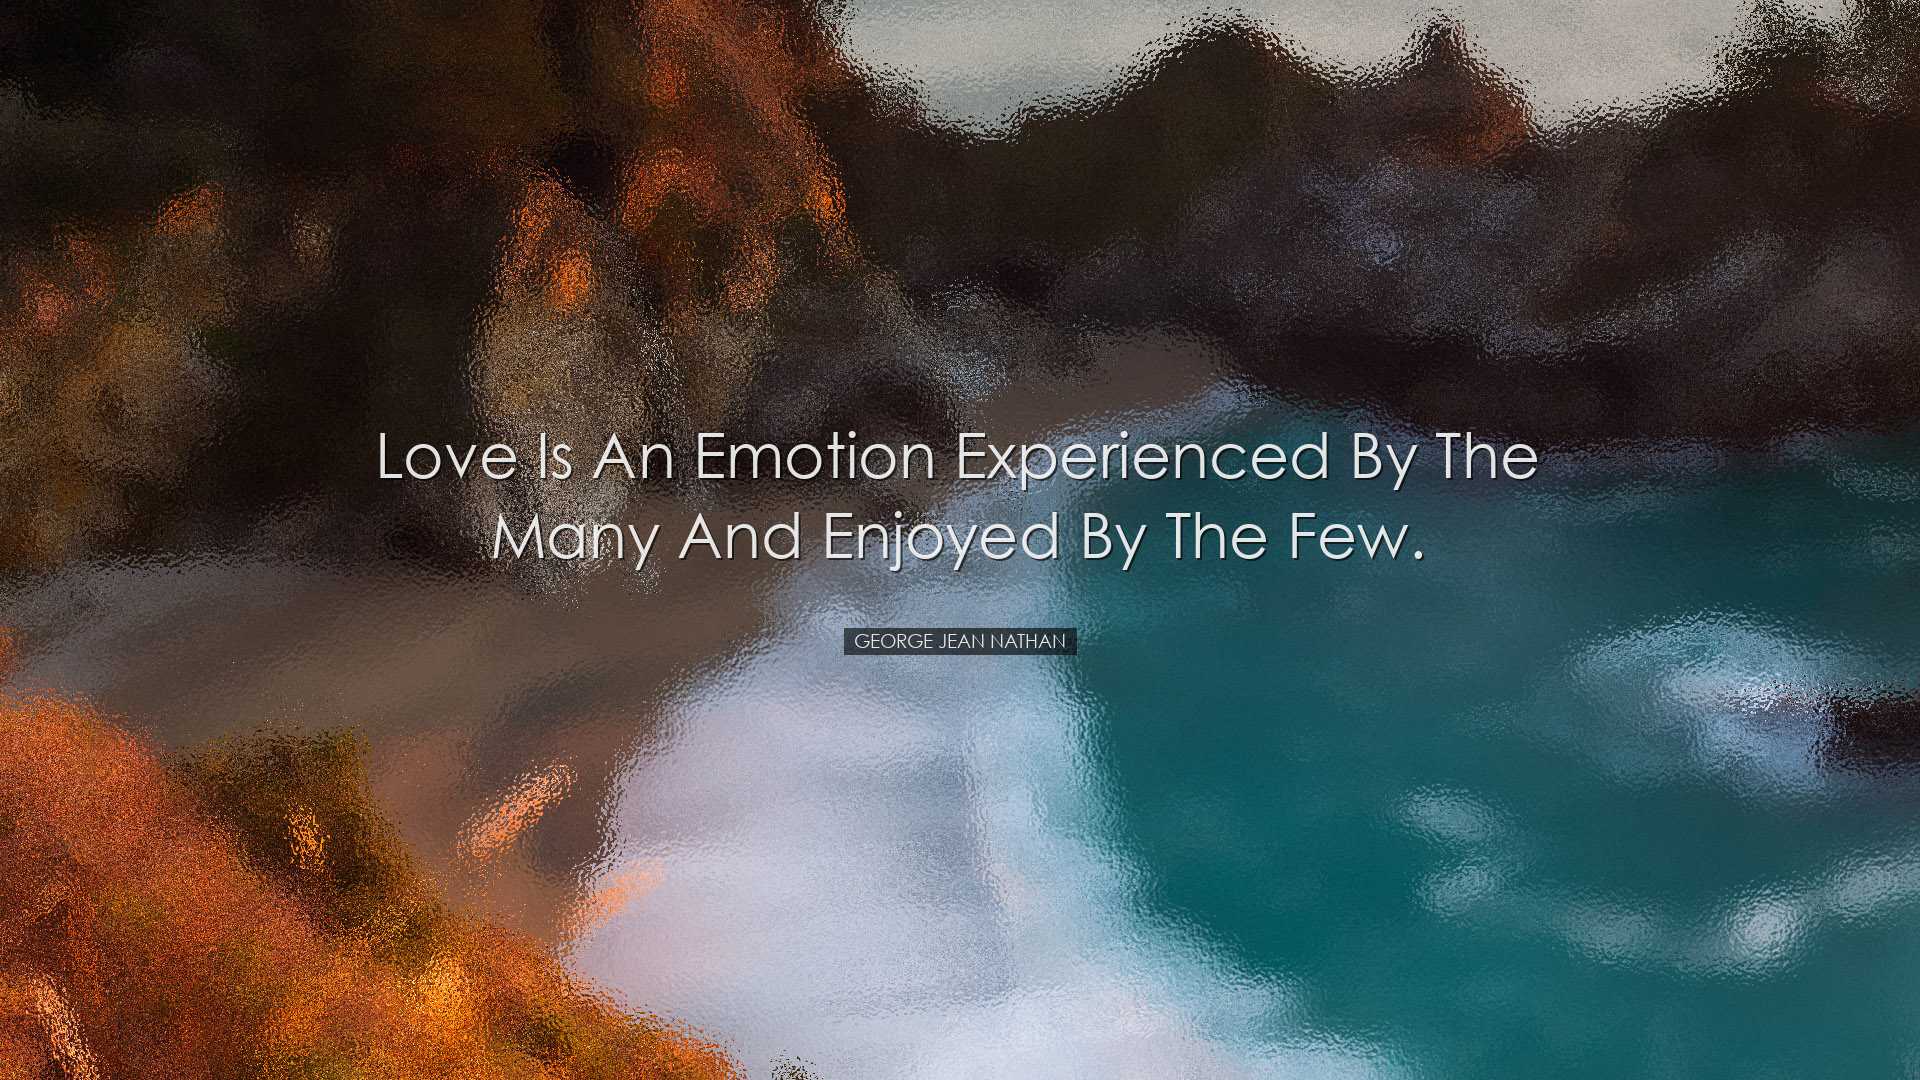 Love is an emotion experienced by the many and enjoyed by the few.